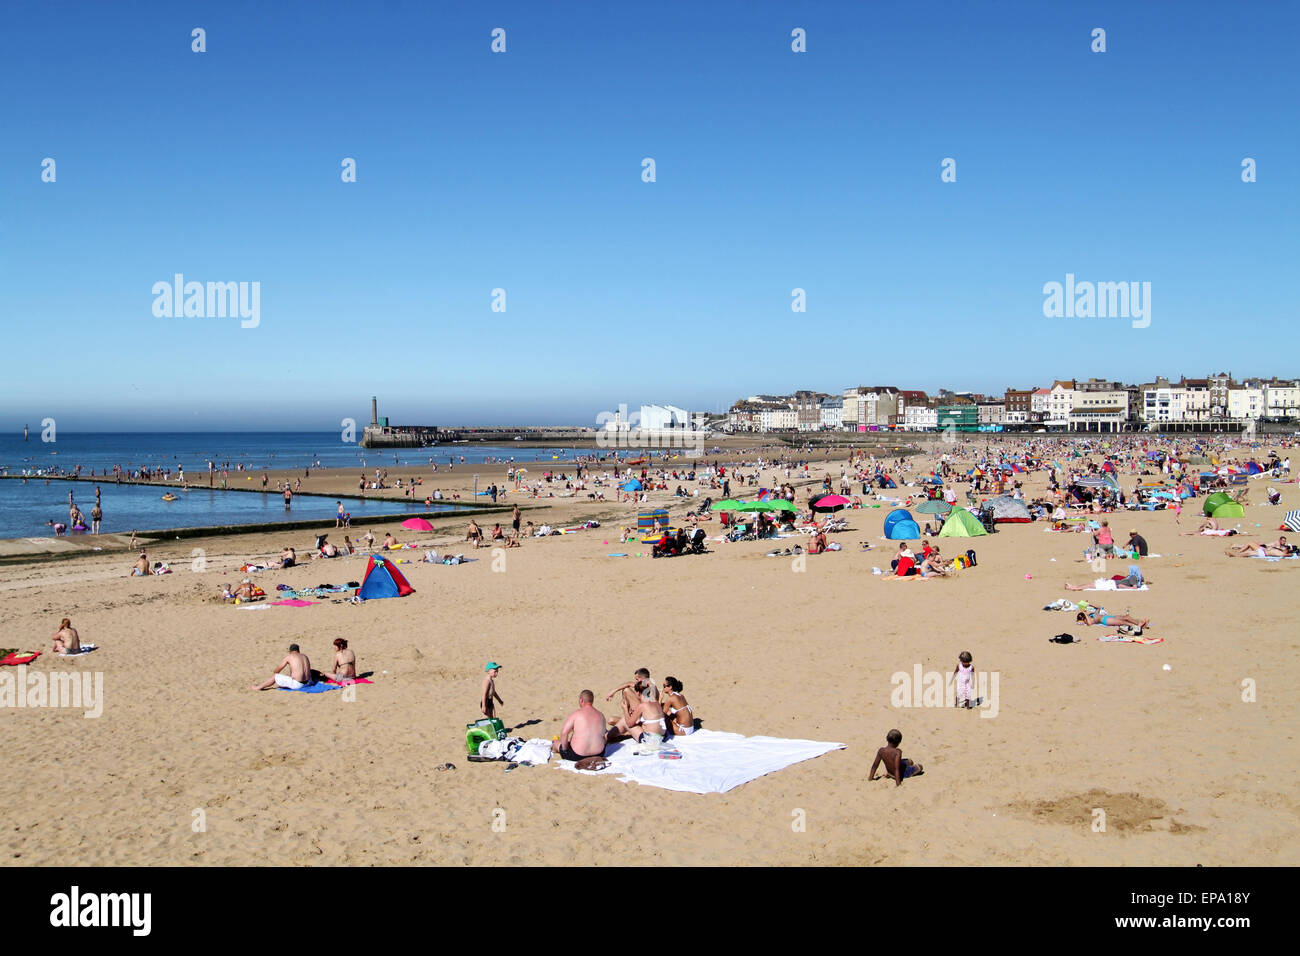 People sunbathing at Margate beach in Kent with the Turner Contemporary Art Gallery in the distance Stock Photo